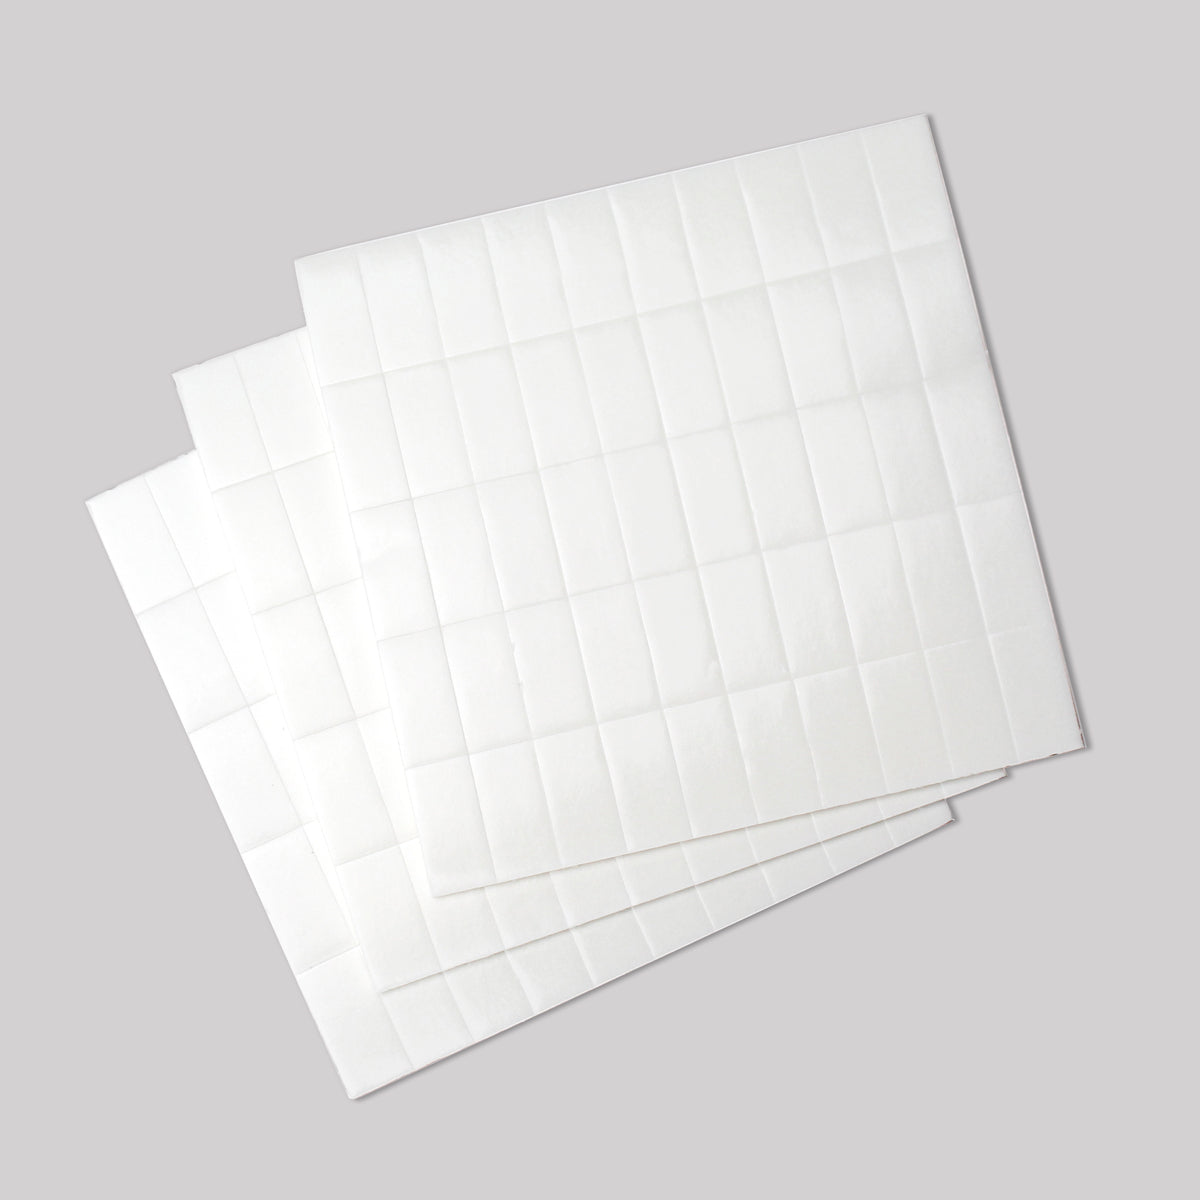 10x20mm Double Sided Adhesive Pads - White 2mm, pack of 3